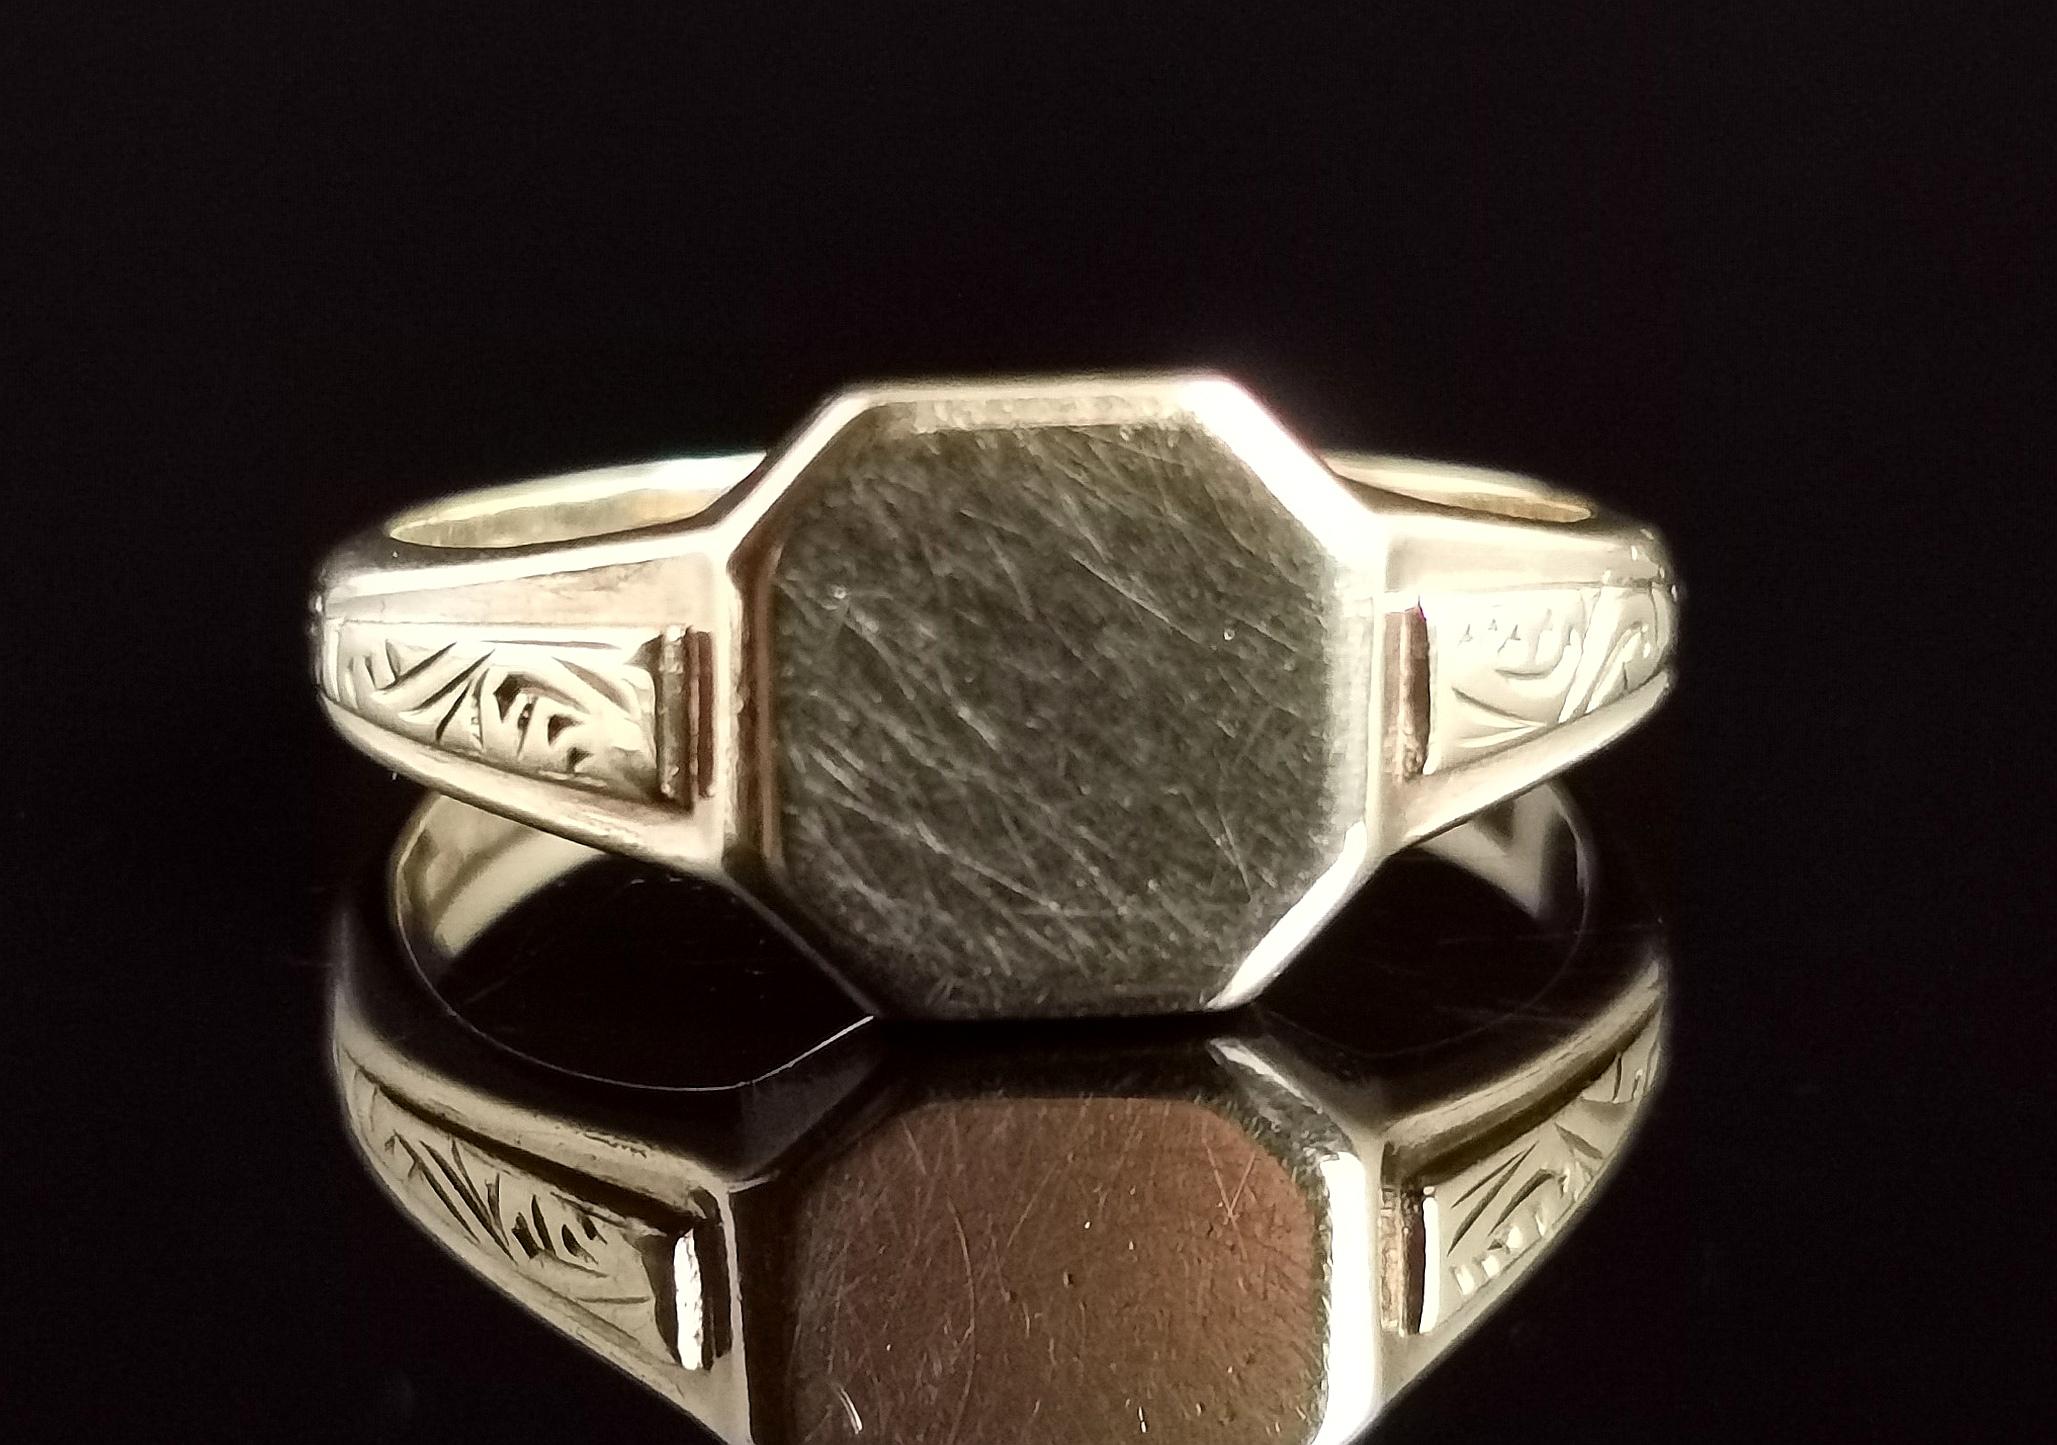 A sweet little 9kt yellow gold Signet ring.

Despite its smaller size it is quite chunky and has a lovely rich glow, the square face has not been engraved so could be personalised if desired to make a great gift.

These look great worn as pinky